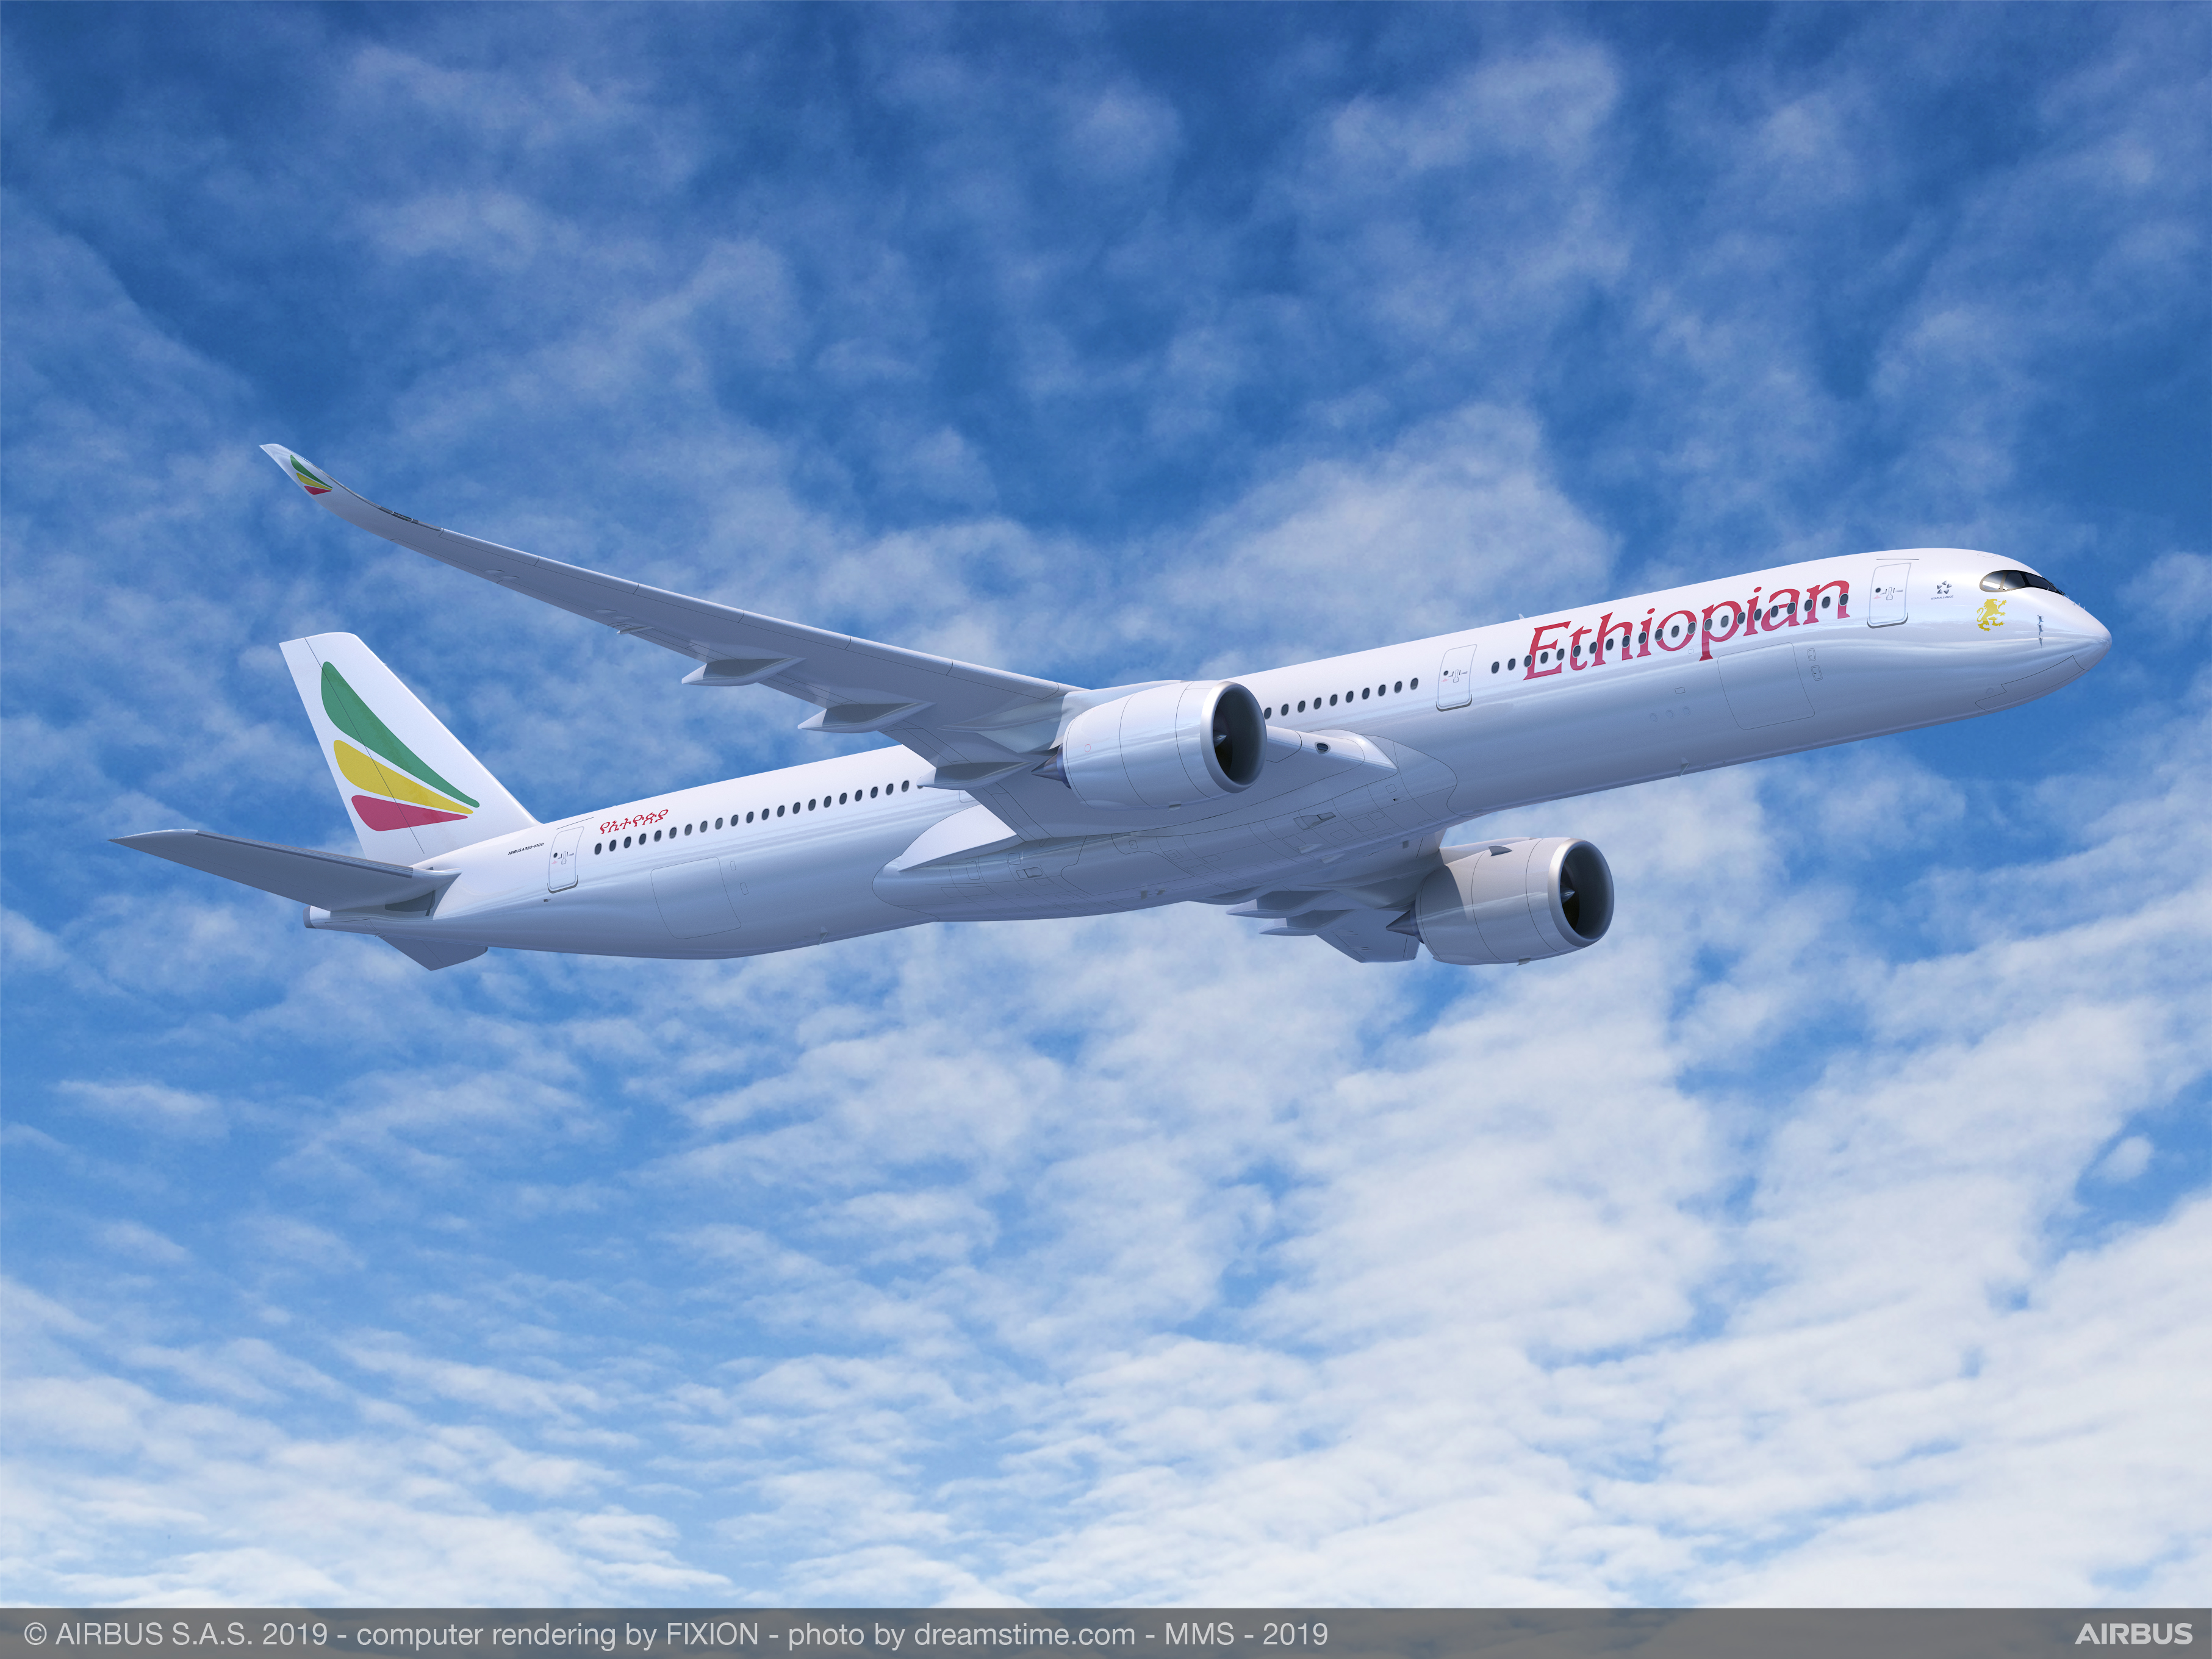 Rolls-Royce and Ethiopian Airlines Sign TotalCare Deal for Trent XWB engines